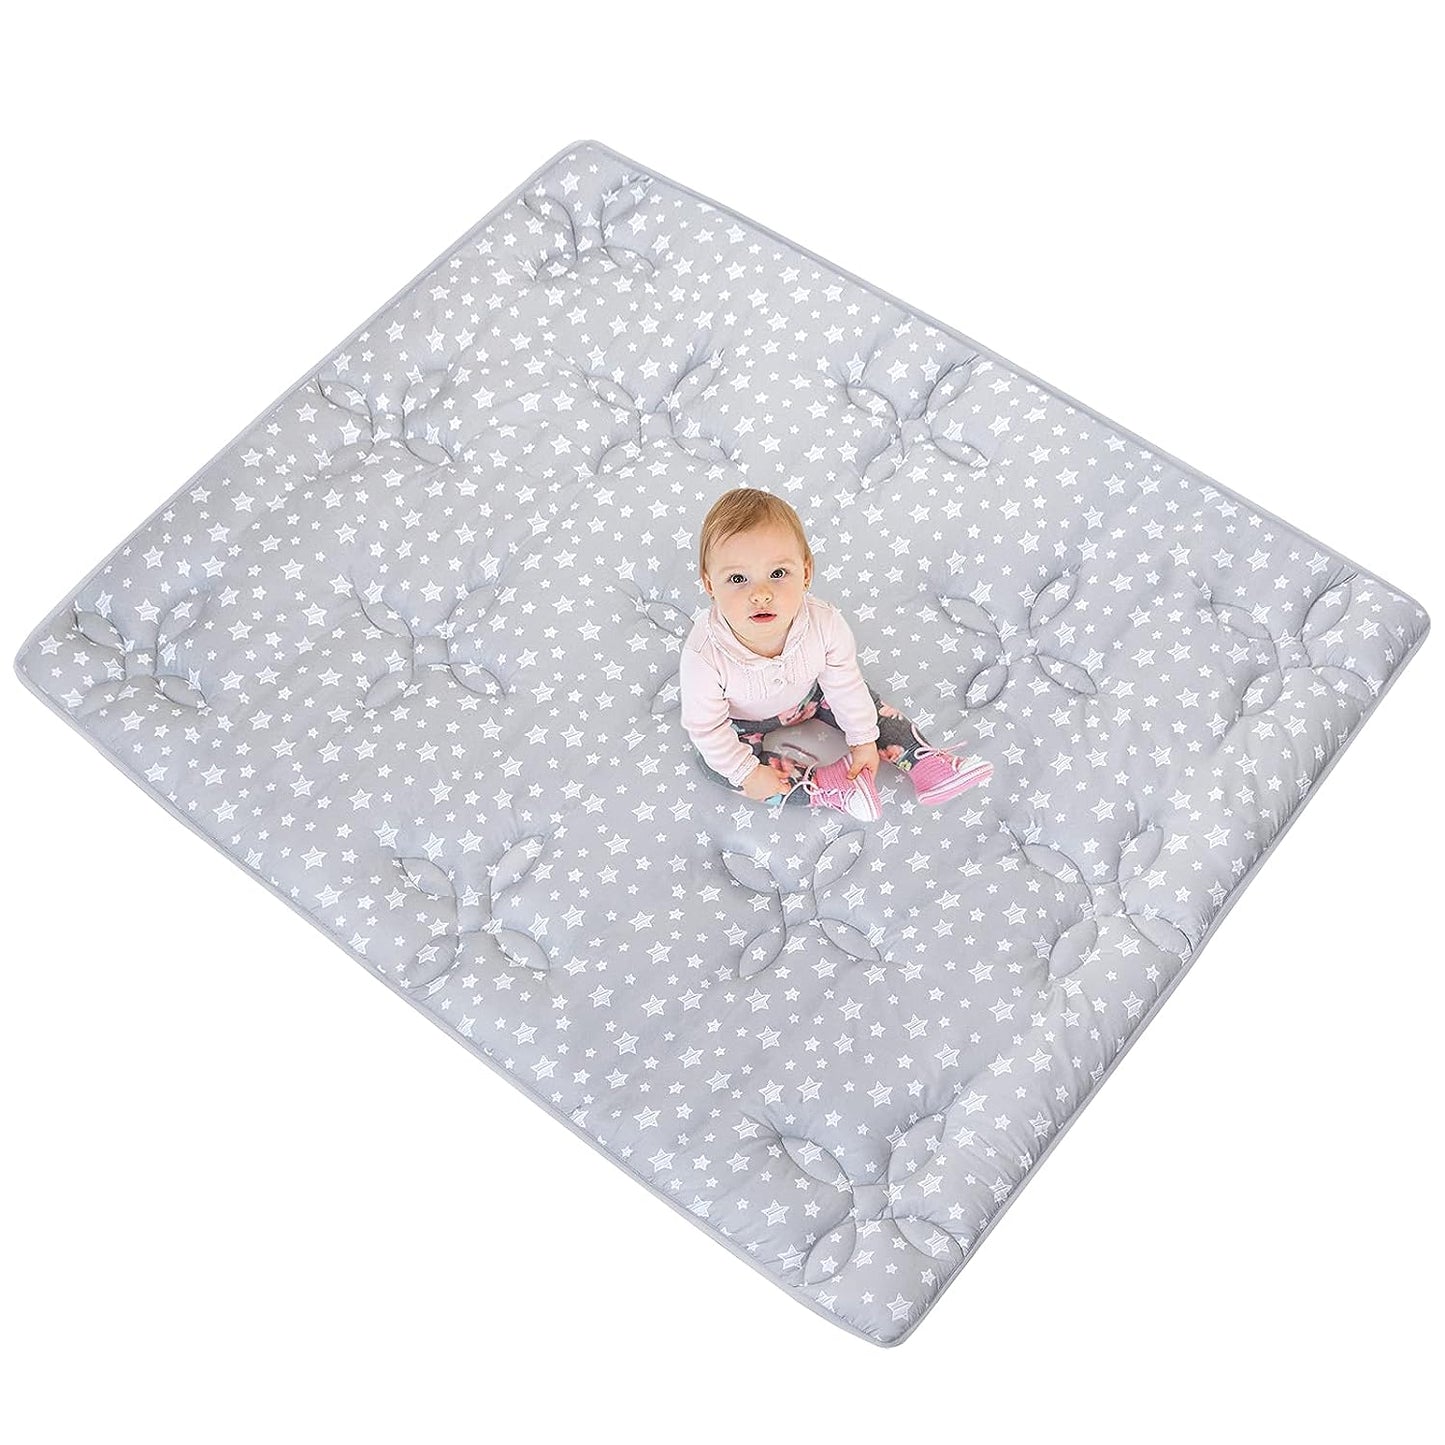 Baby Play Mat | Playpen Mat - 72" x 59", Large Padded Tummy Time Activity Mat for Infant & Toddler, Grey Star - Moonsea Bedding